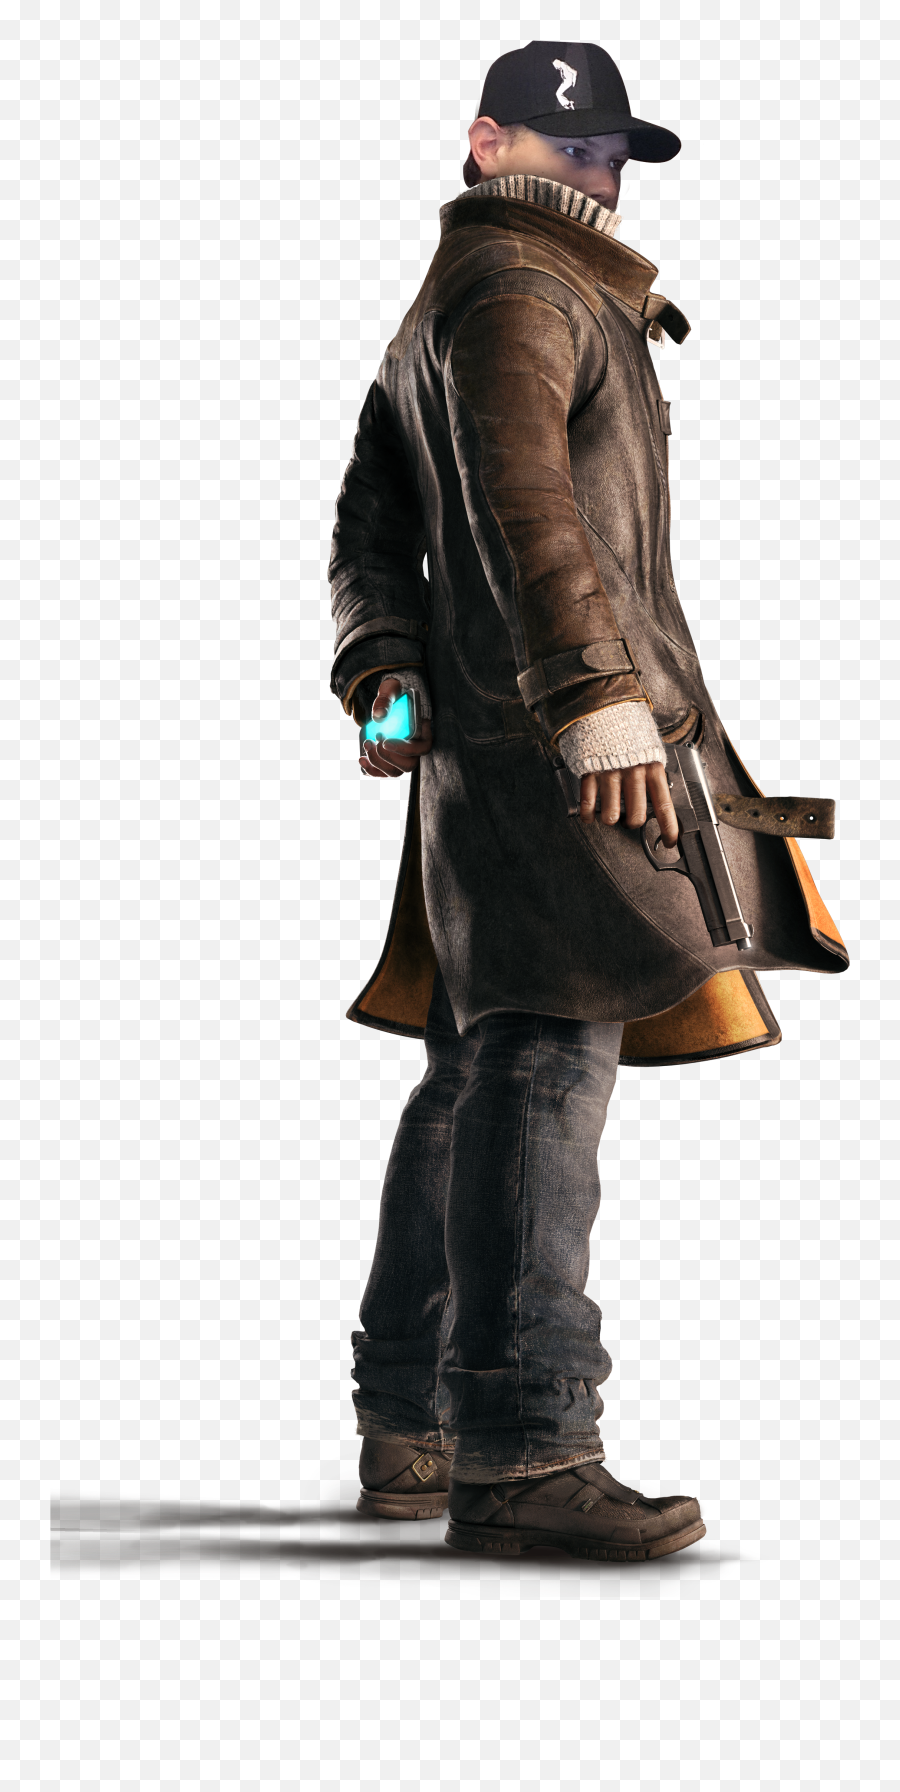 Watch Dog Watch Dogs Png Images Pngs 2png Snipstock Emoji,Watch Dogs 2 Logo Png